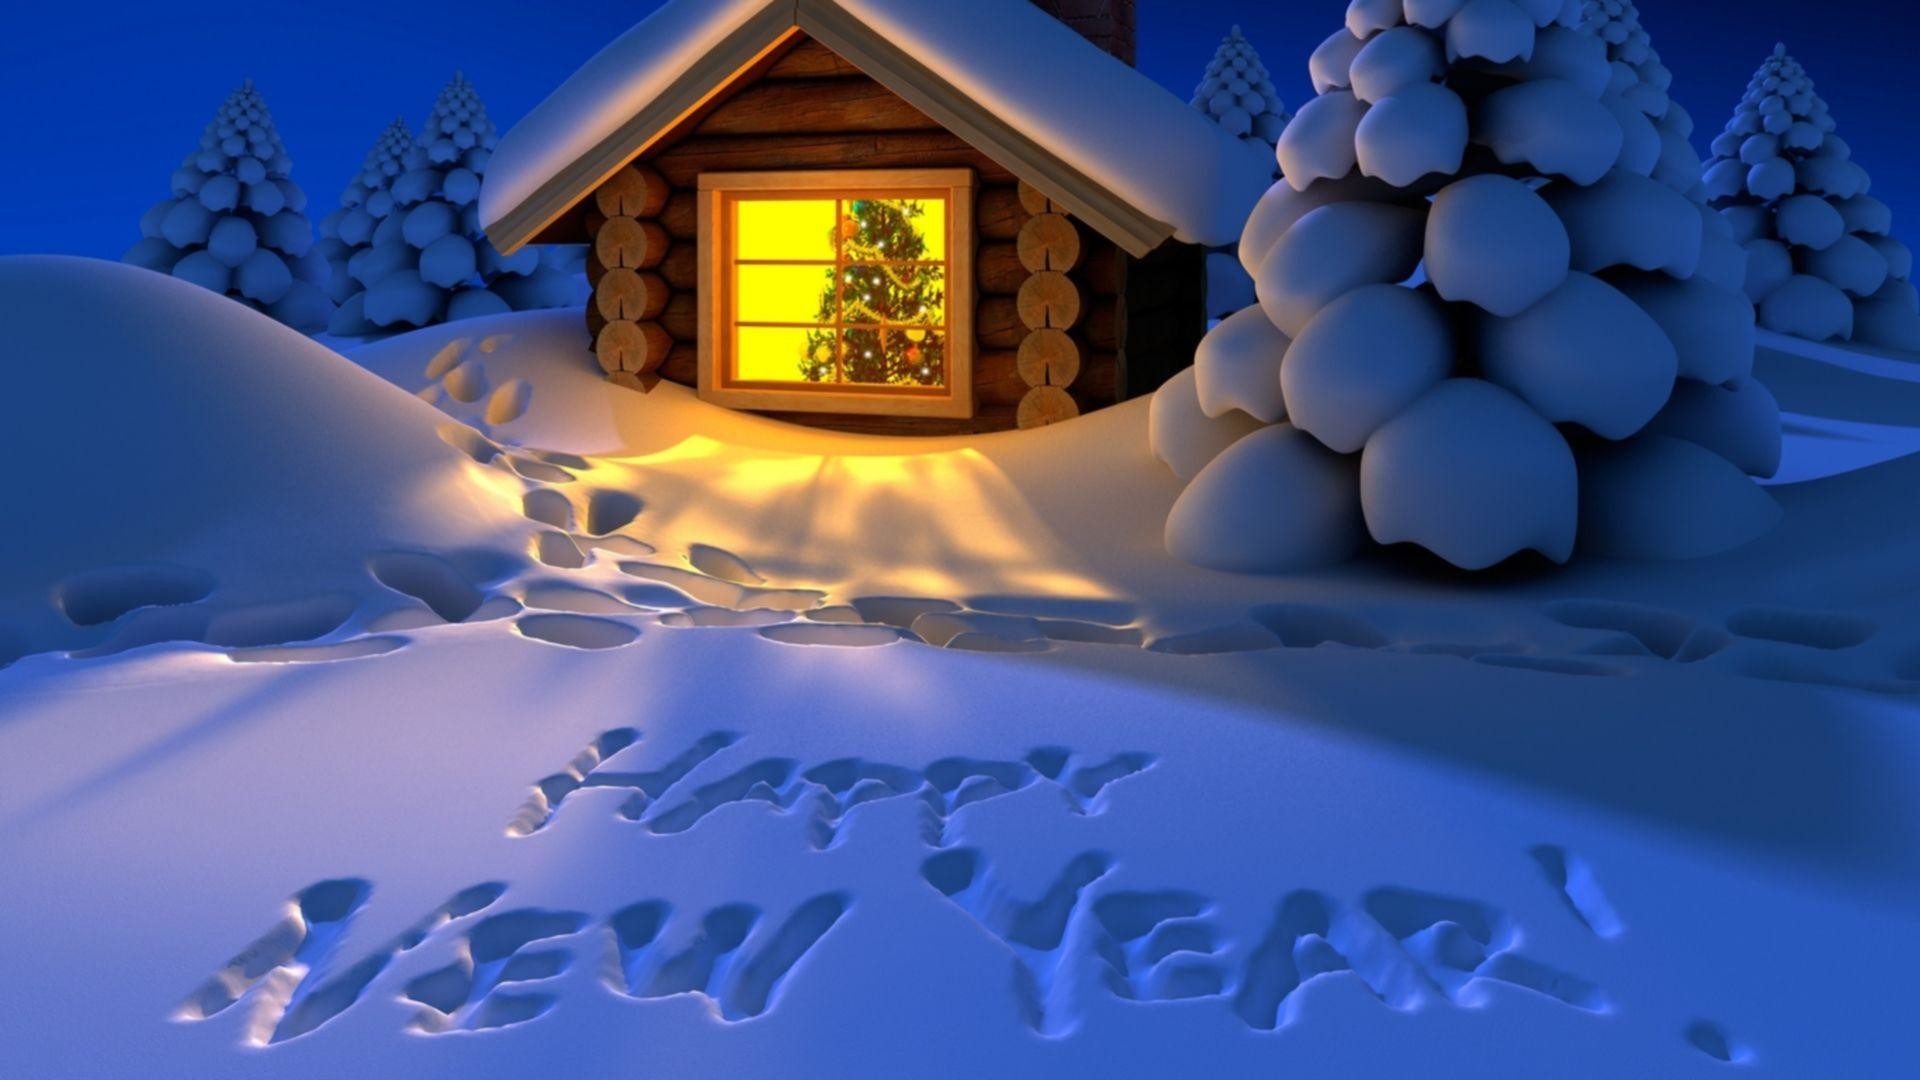 1920x1080 New Year Wallpapers 2015 | Happy New Year 2015